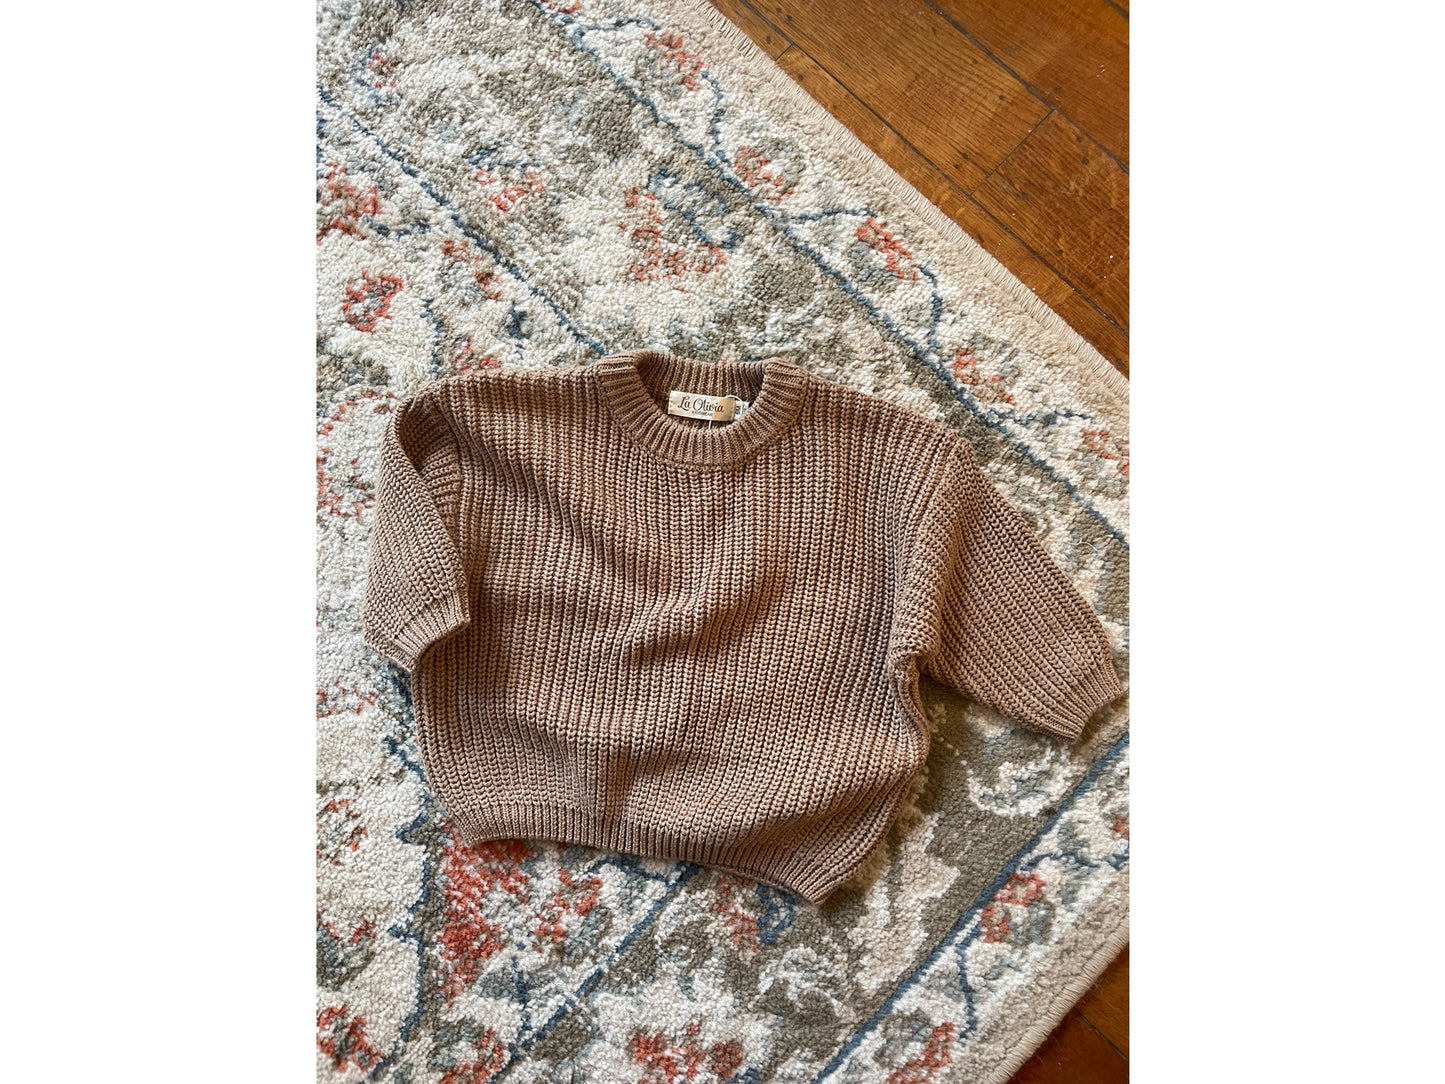 Knitted sweater - Mocca (6M-9M-18M)